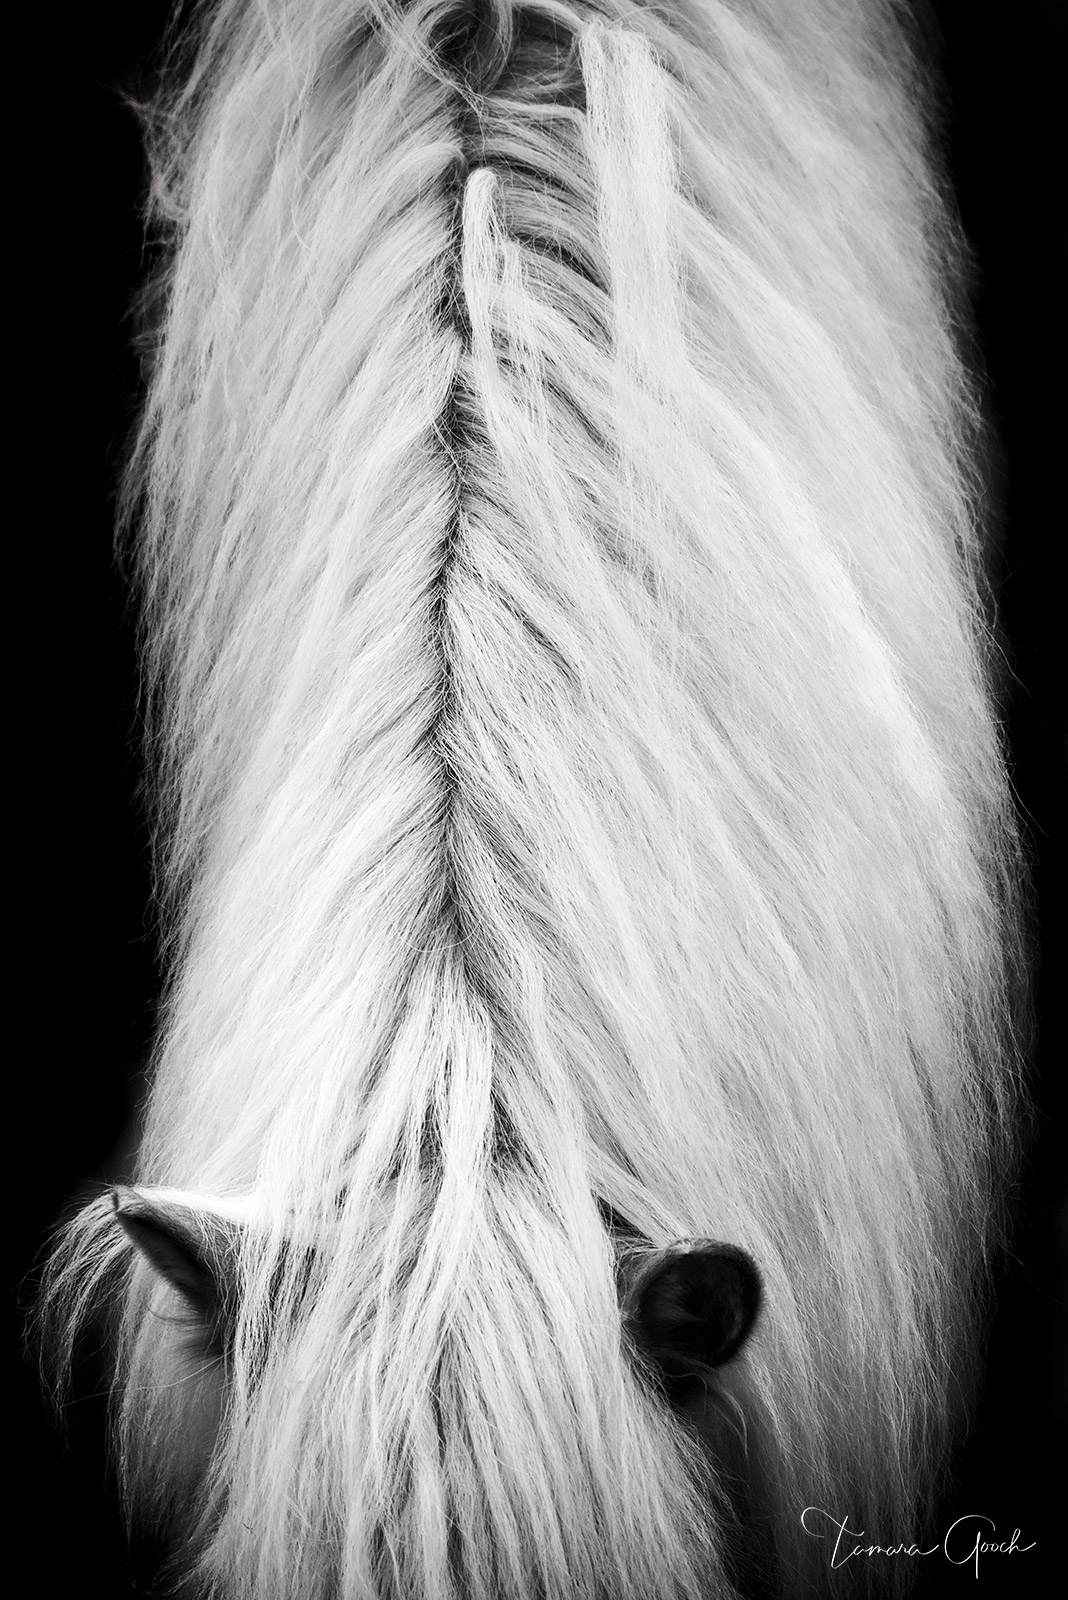 Black and white fine are equestrian horse print of a Haflinger horses mane, neck and ears. Great horse wall art and home decor. Gallery quality.